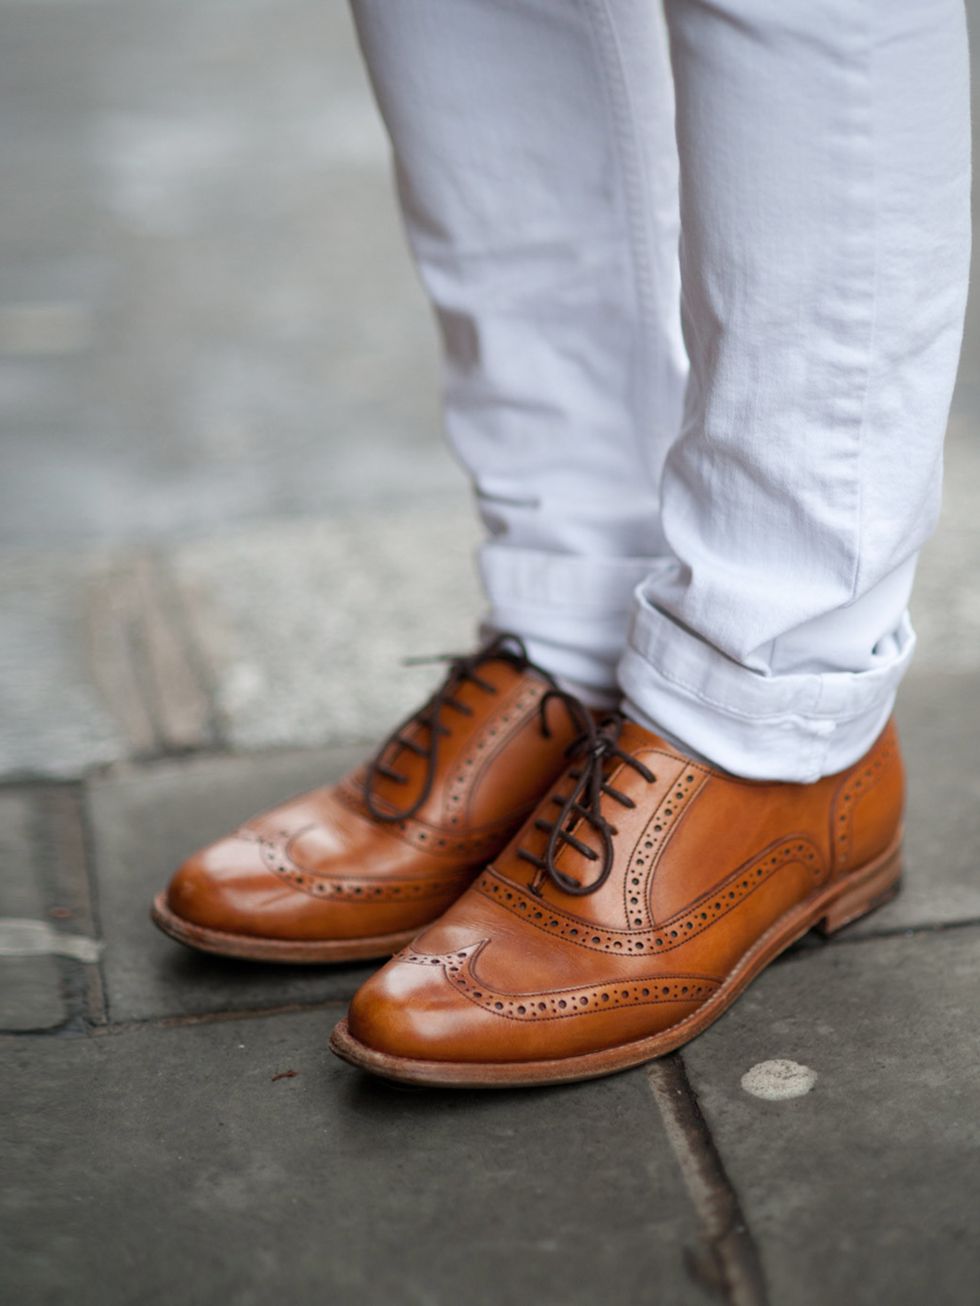 <p>Lucie Cambier, 29, supervisor. Comptoir Des Cotonniers trousers, Barker brogues.</p><p>Photo by Stephanie Sian Smith</p>